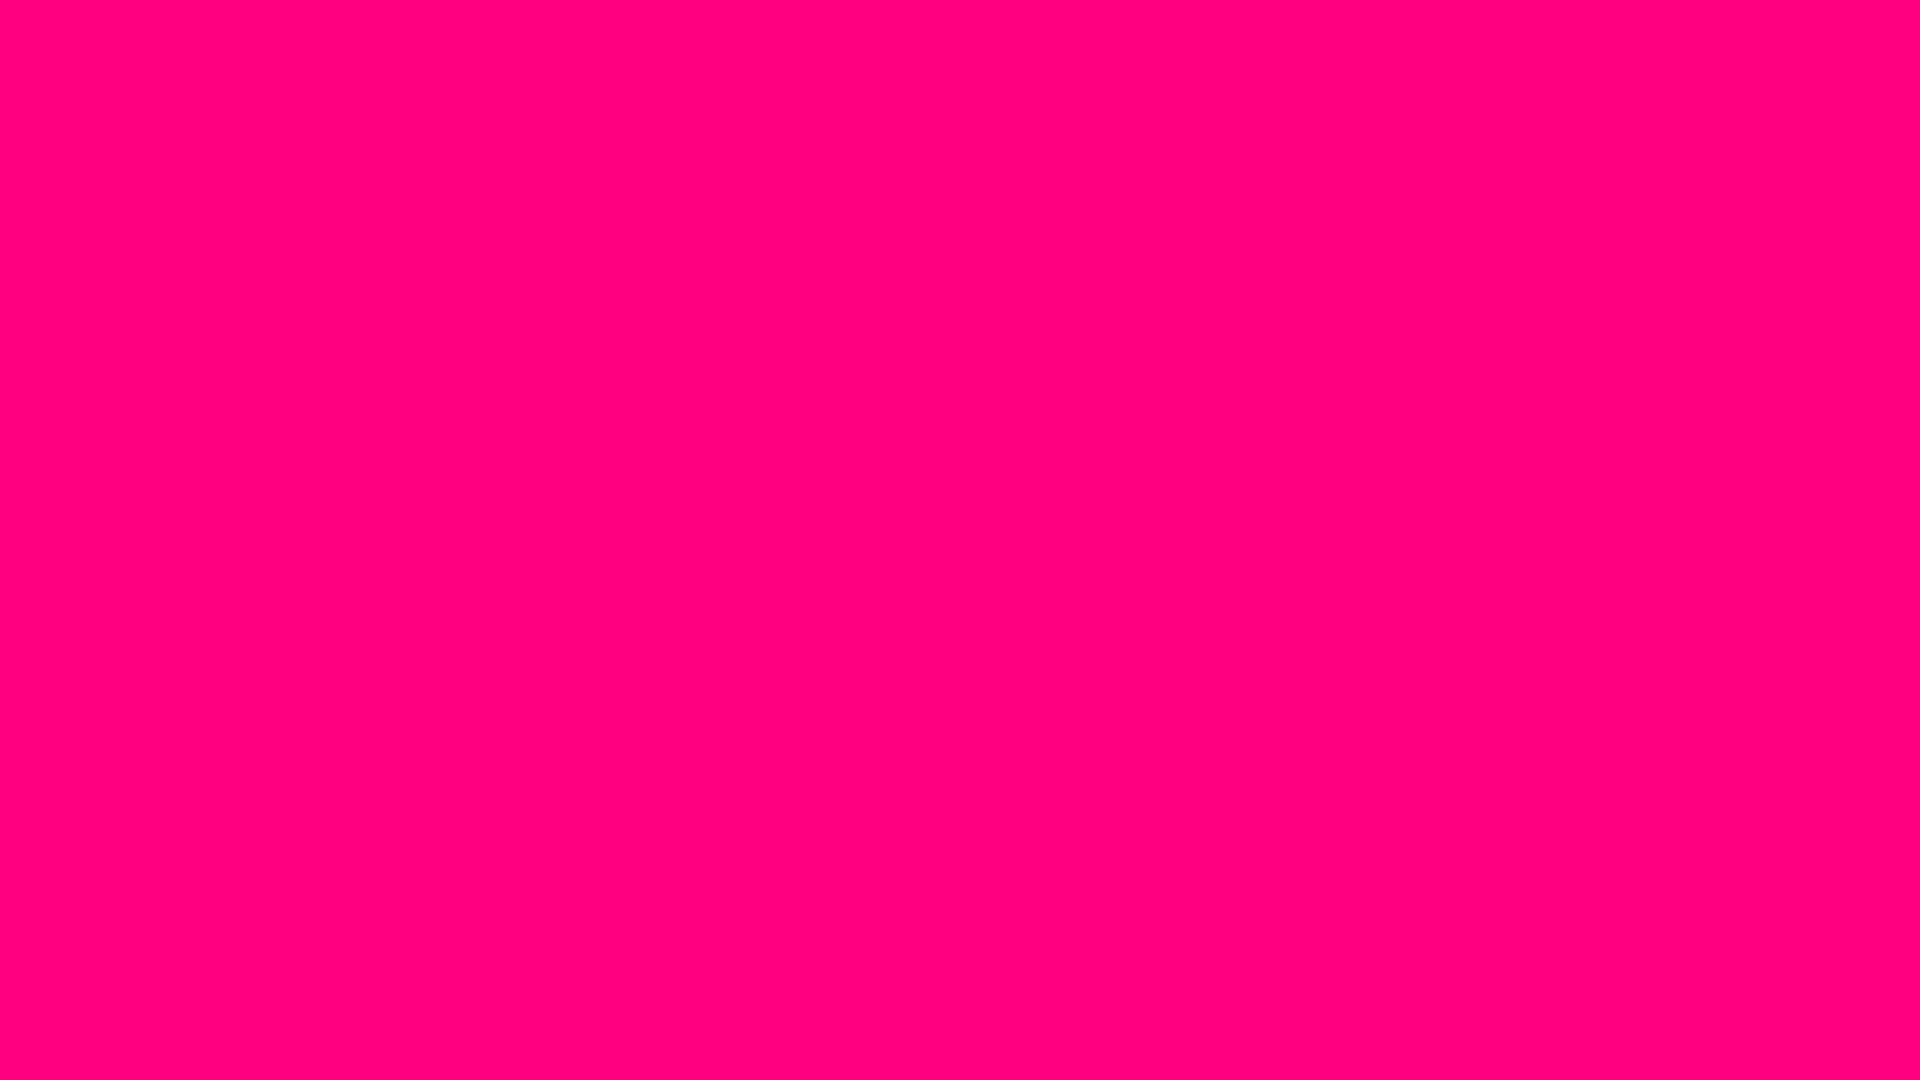 High Contrast Hot Pink Background